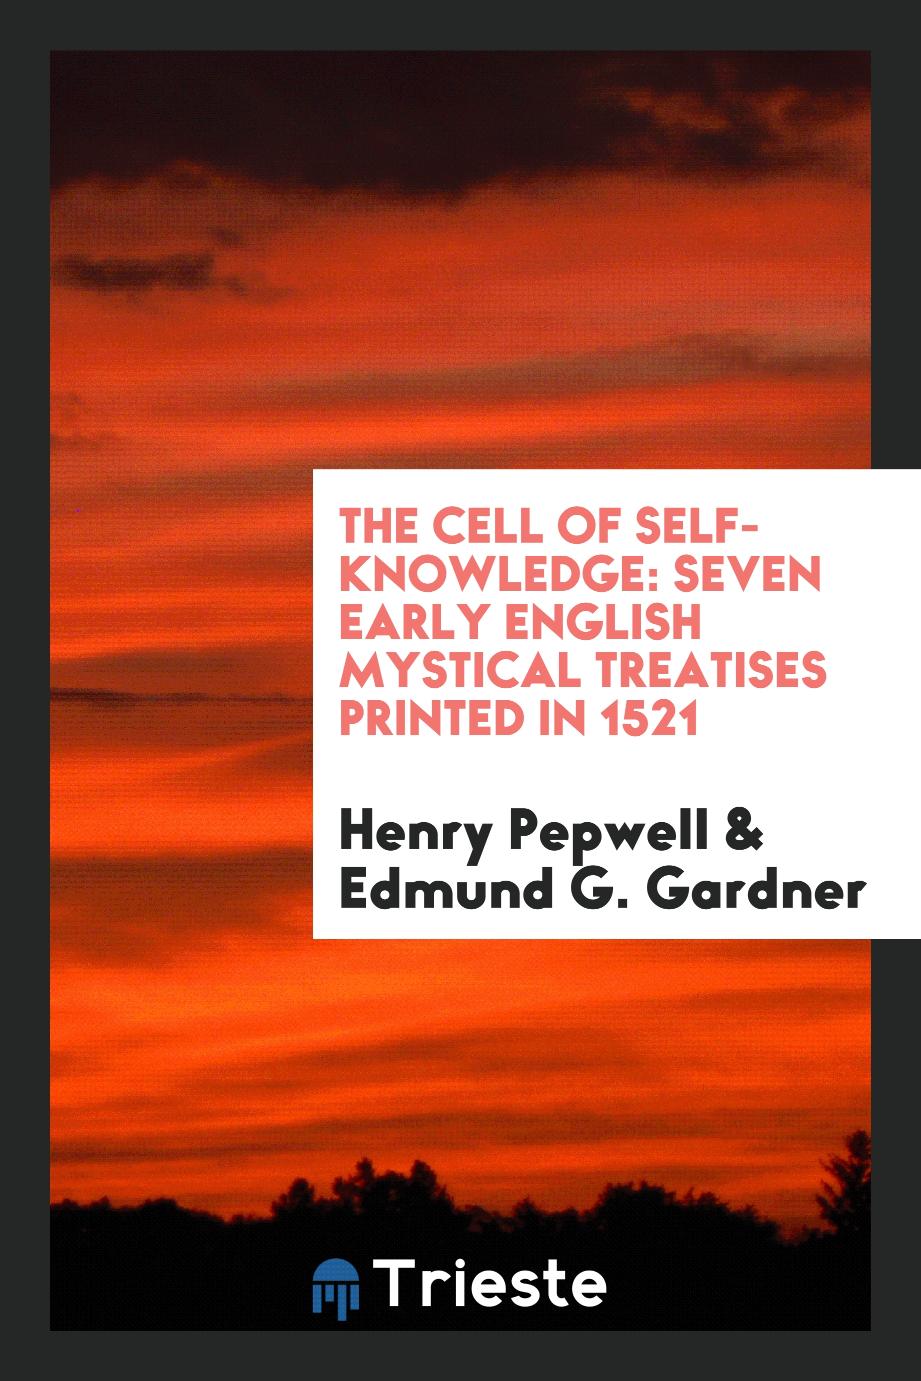 The Cell of Self-Knowledge: Seven Early English Mystical Treatises Printed in 1521